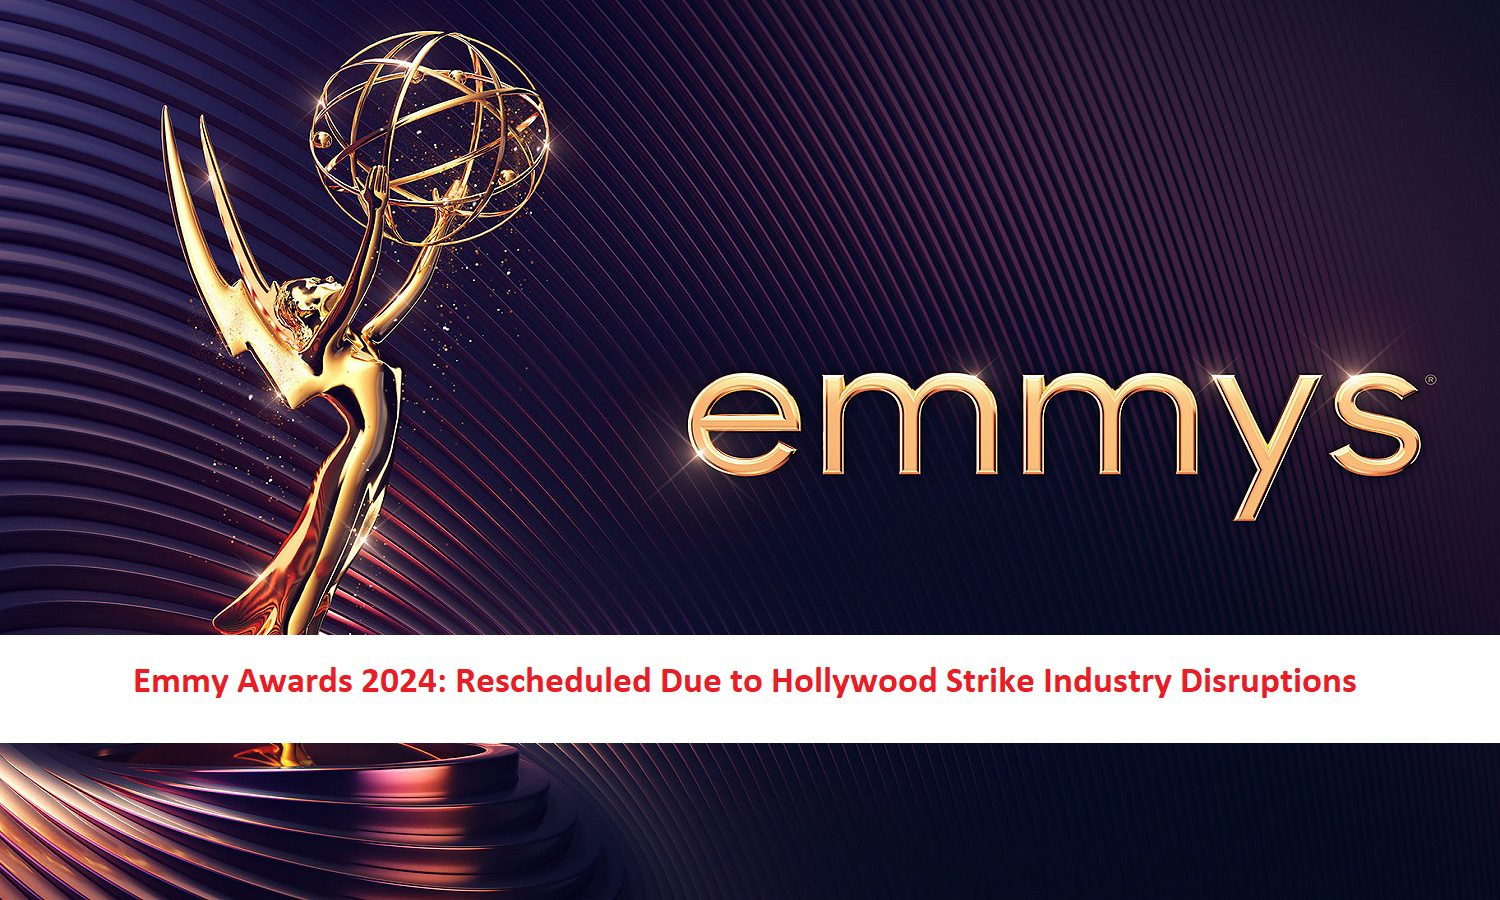 Emmy Awards 2024: Rescheduled Due to Hollywood Strike Industry Disruptions